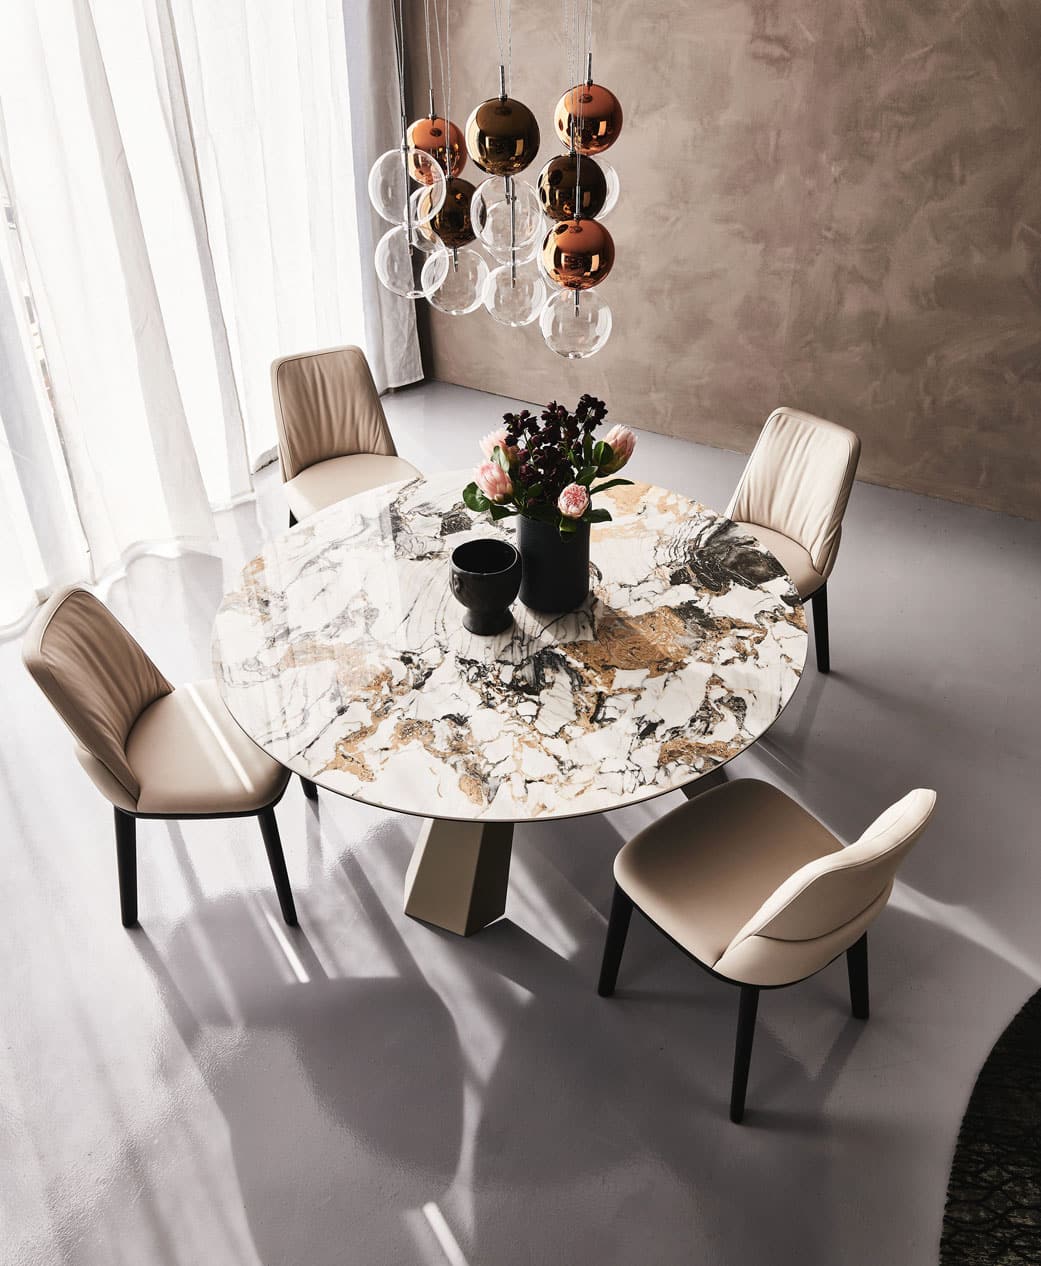 Made In Italy modern Dining room Set from Cattelan